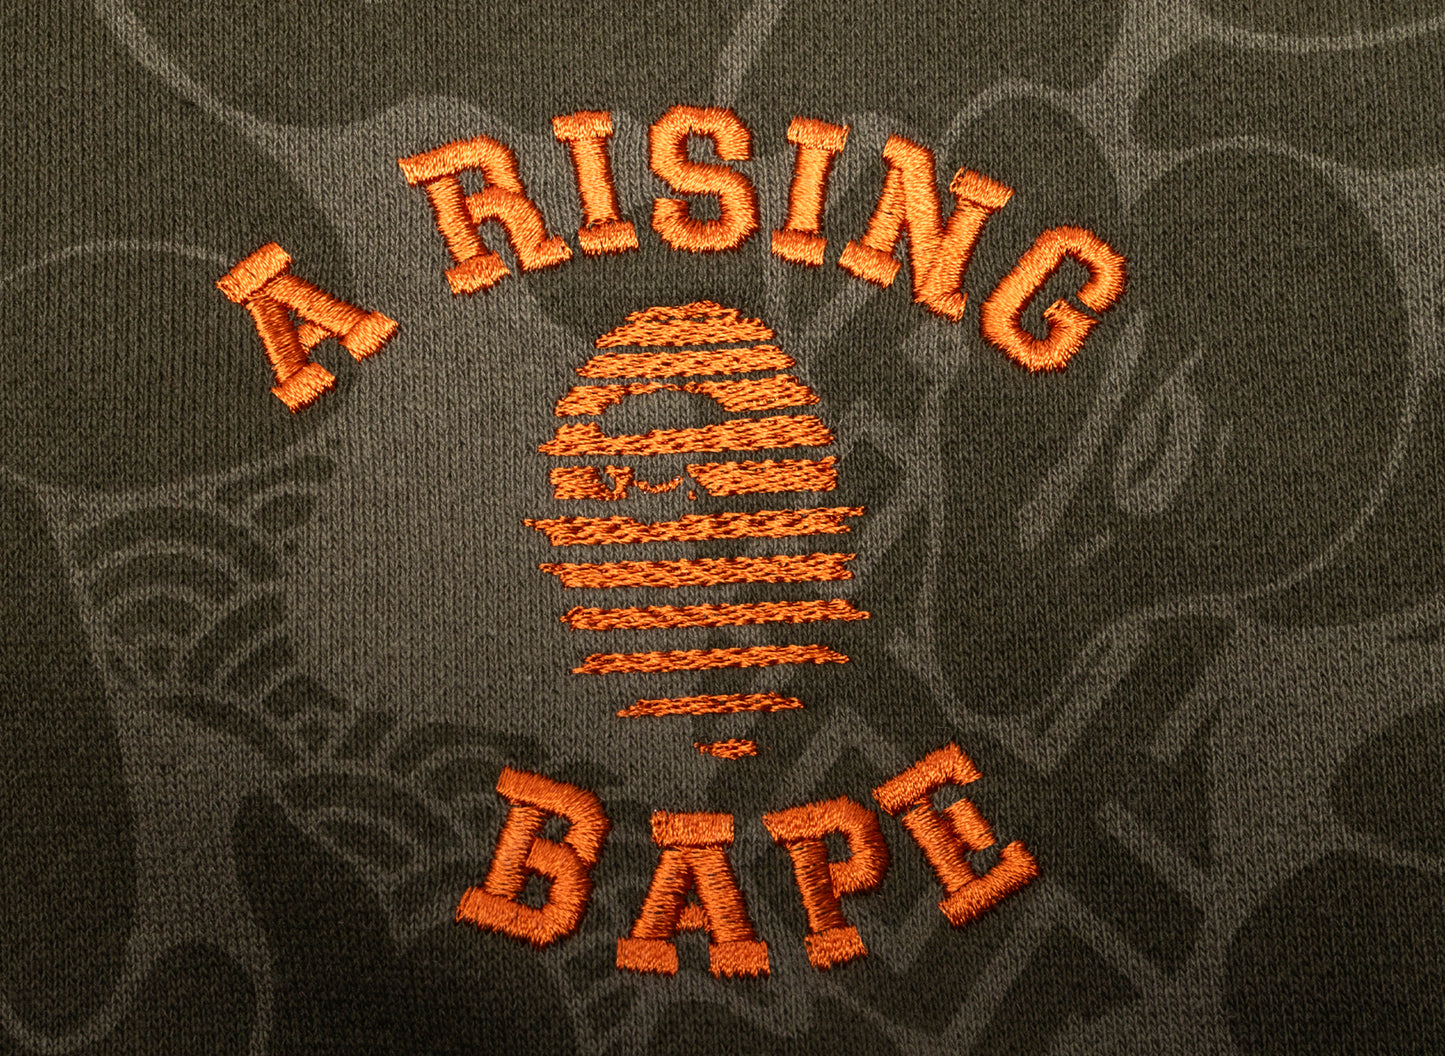 A Bathing Ape Asia Camo Pullover Hoodie in Olive xld